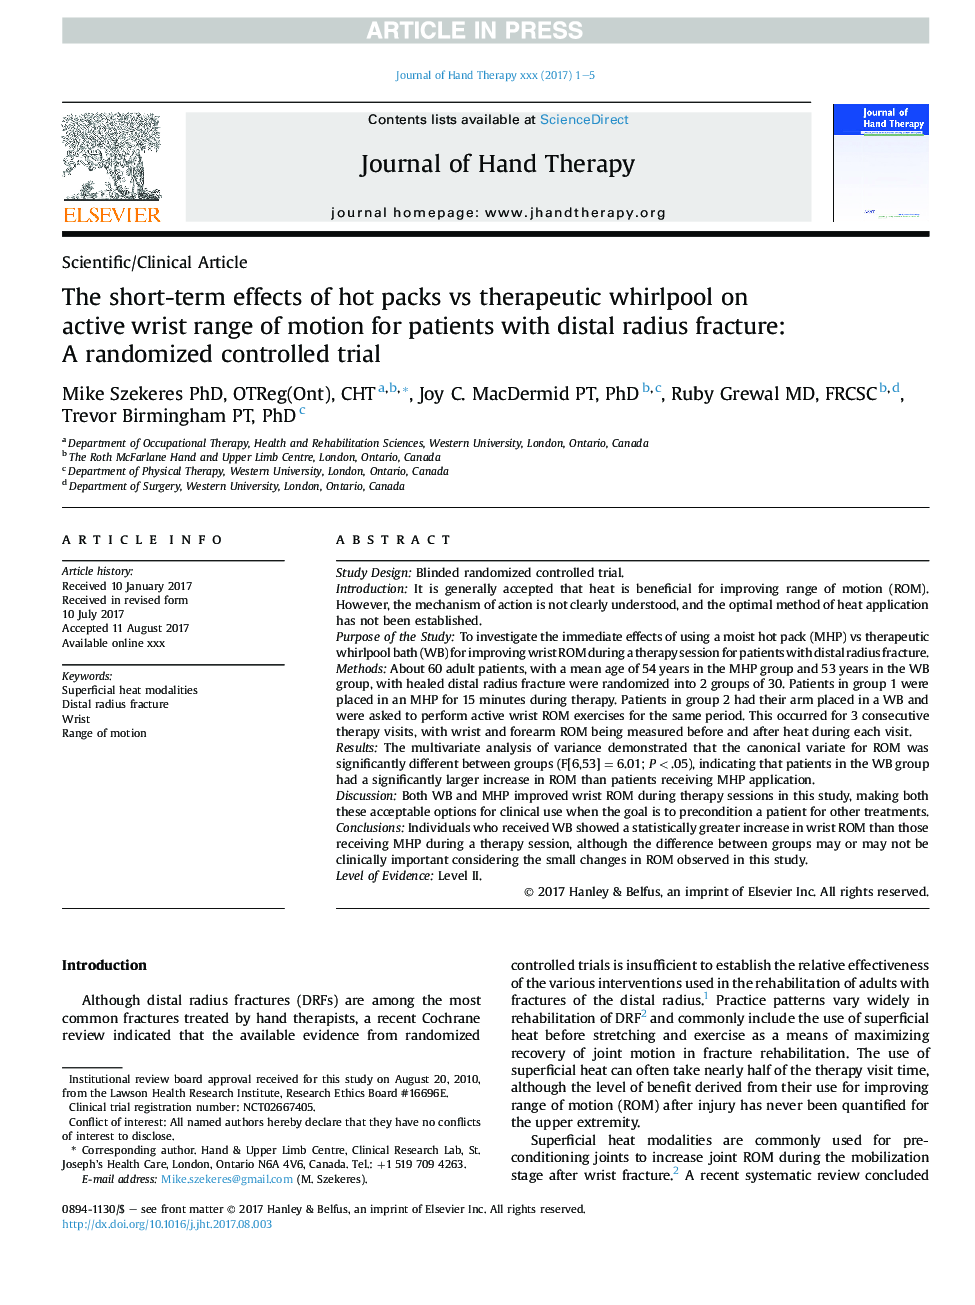 The short-term effects of hot packs vs therapeutic whirlpool on active wrist range of motion for patients with distal radius fracture: A randomized controlled trial